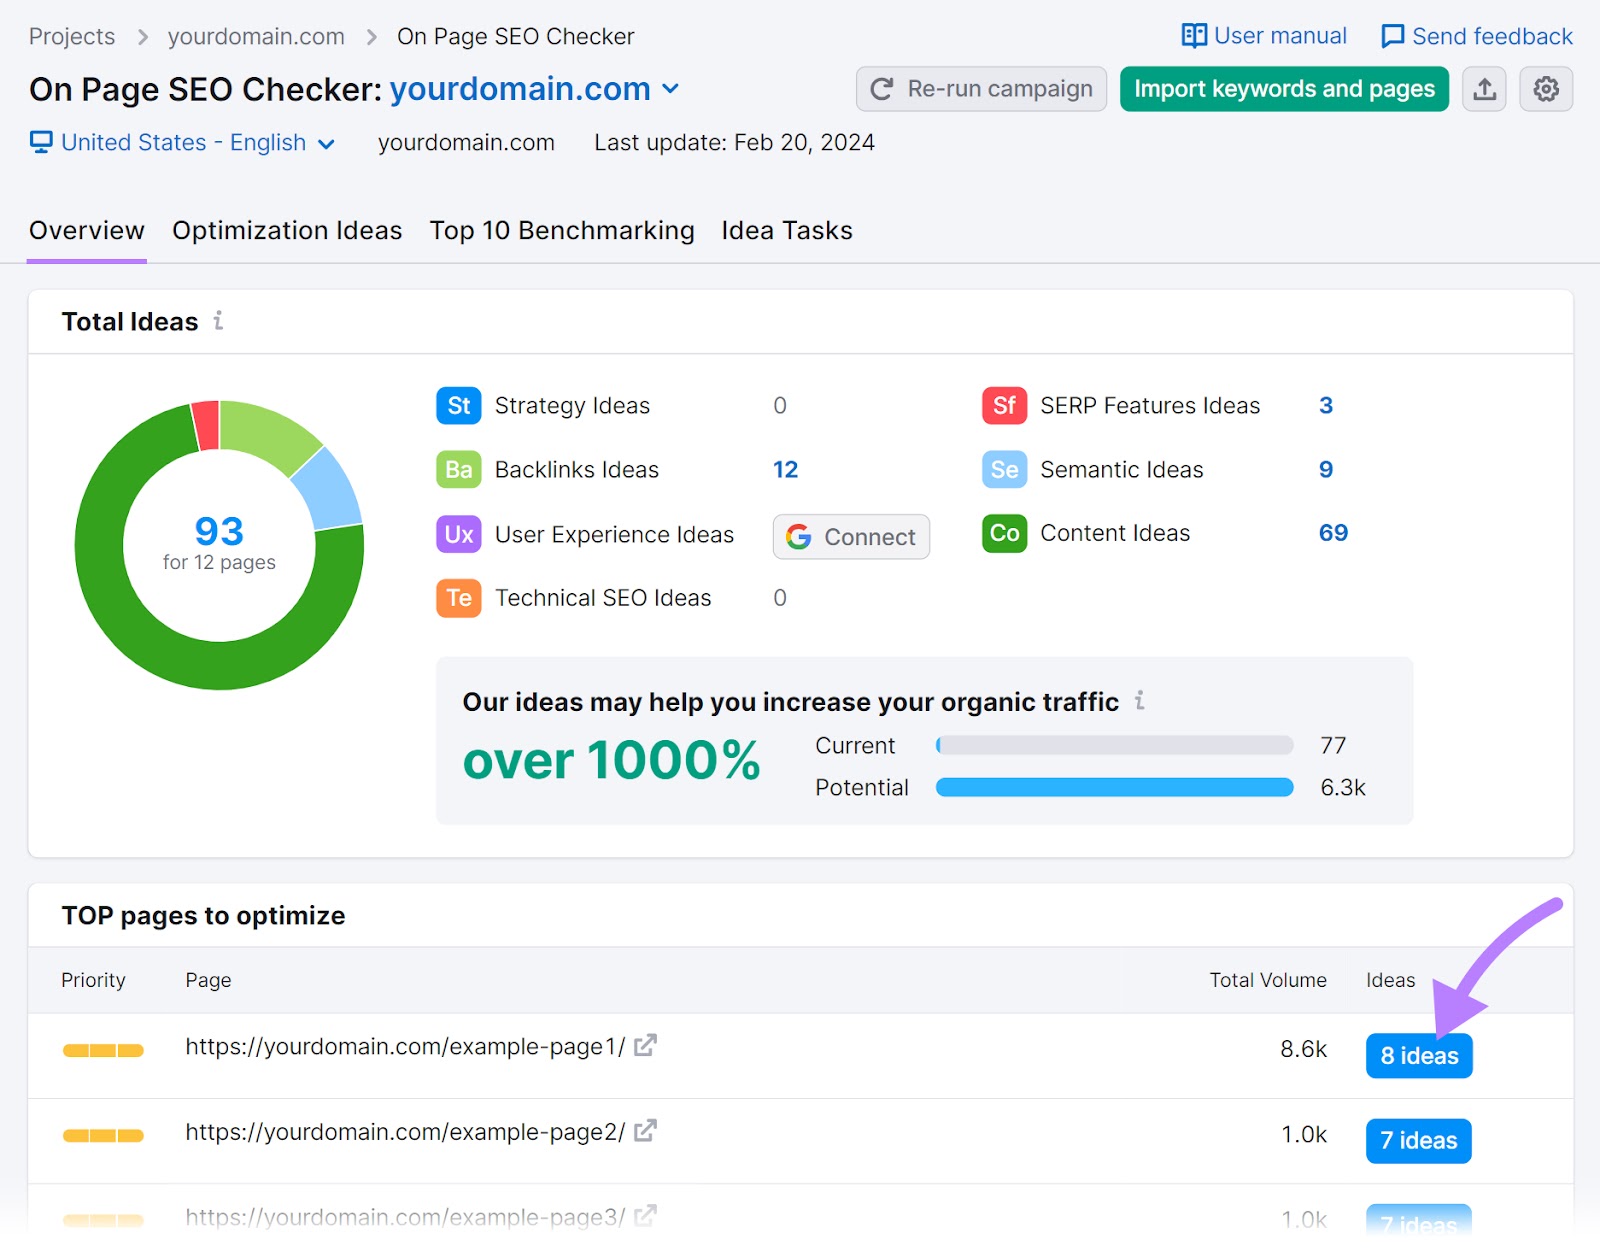 On Page SEO Checker dashboard showing a summary of strategy, backlinks, user experience, technical SEO, SERP features, semantic, and content ideas